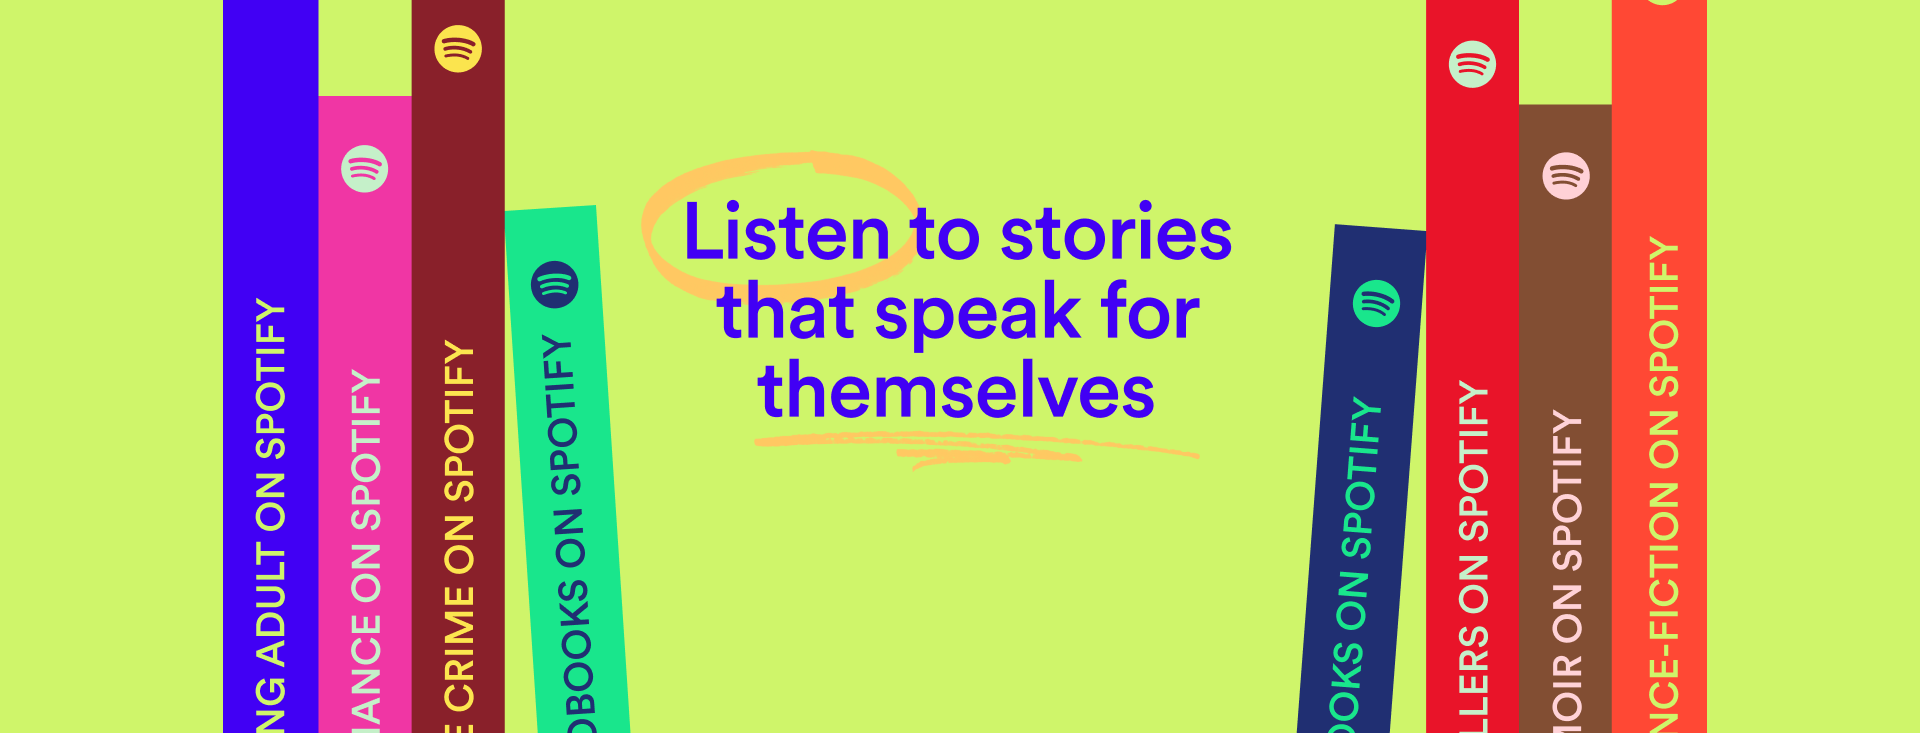 A promo for Spotify's push into audiobooks.